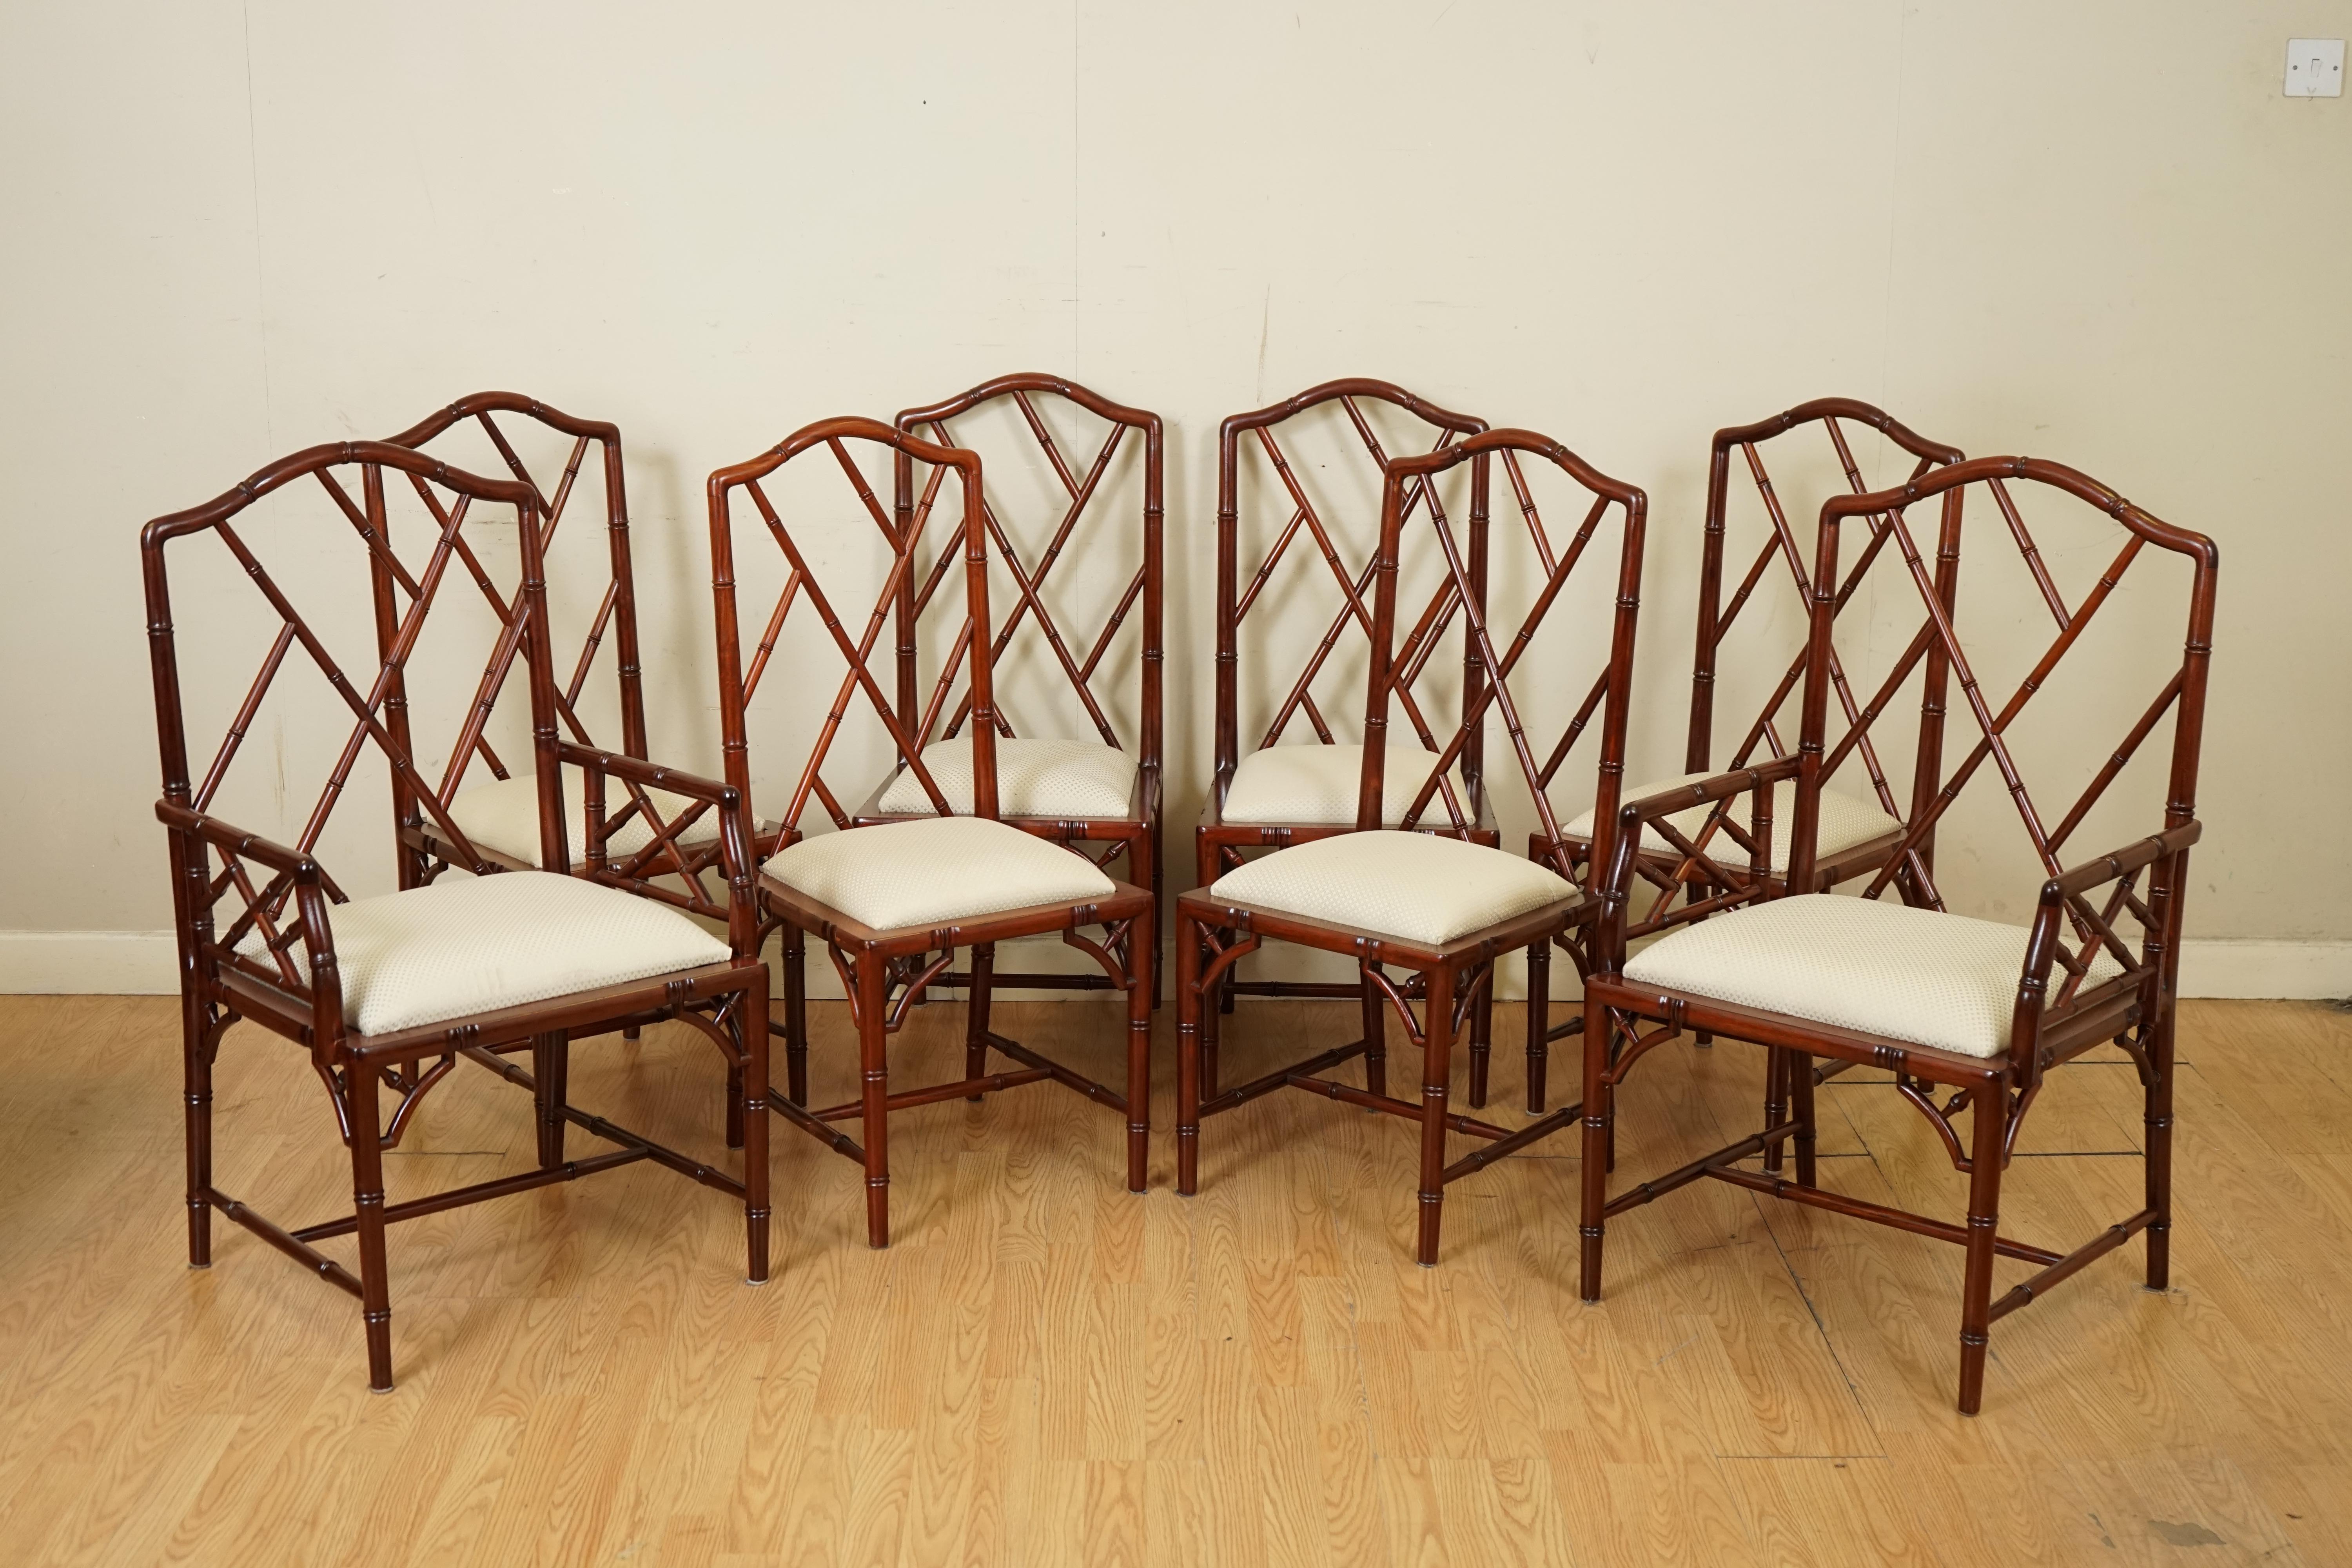 We are so excited to present to you this stunning set of bamboo style dining chairs.

All of the seatings have been recovered in a lovely white nude fabric.

These chairs have been imported from China by it's previous owner.

We have lightly